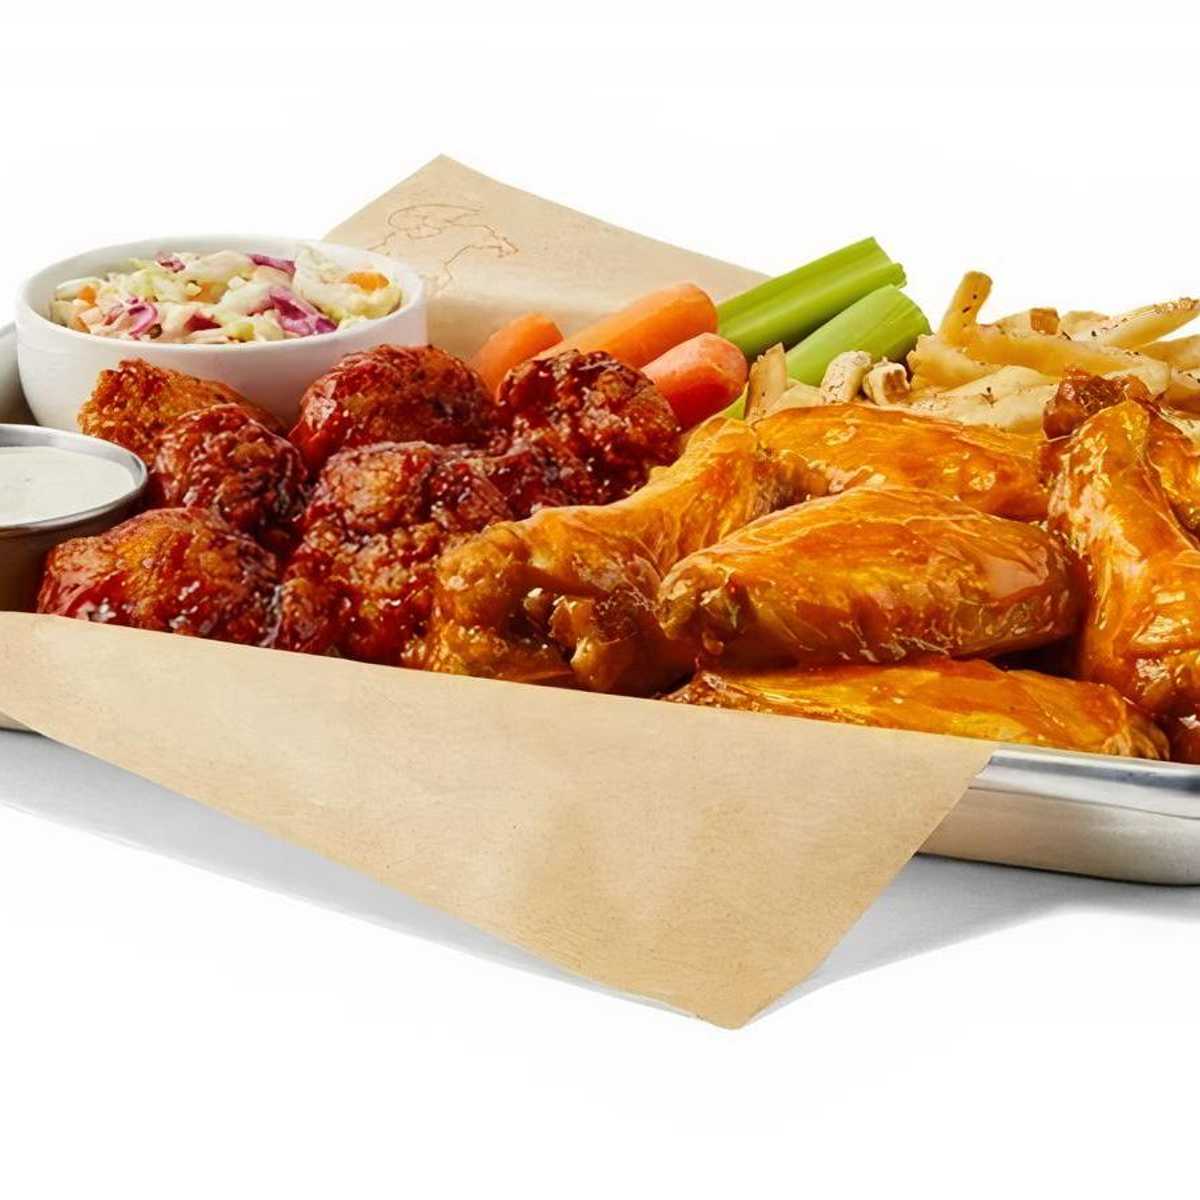 Buffalo Wild Wings Delivery Takeout | 513 West Taylor Street | Menu & Prices | DoorDash